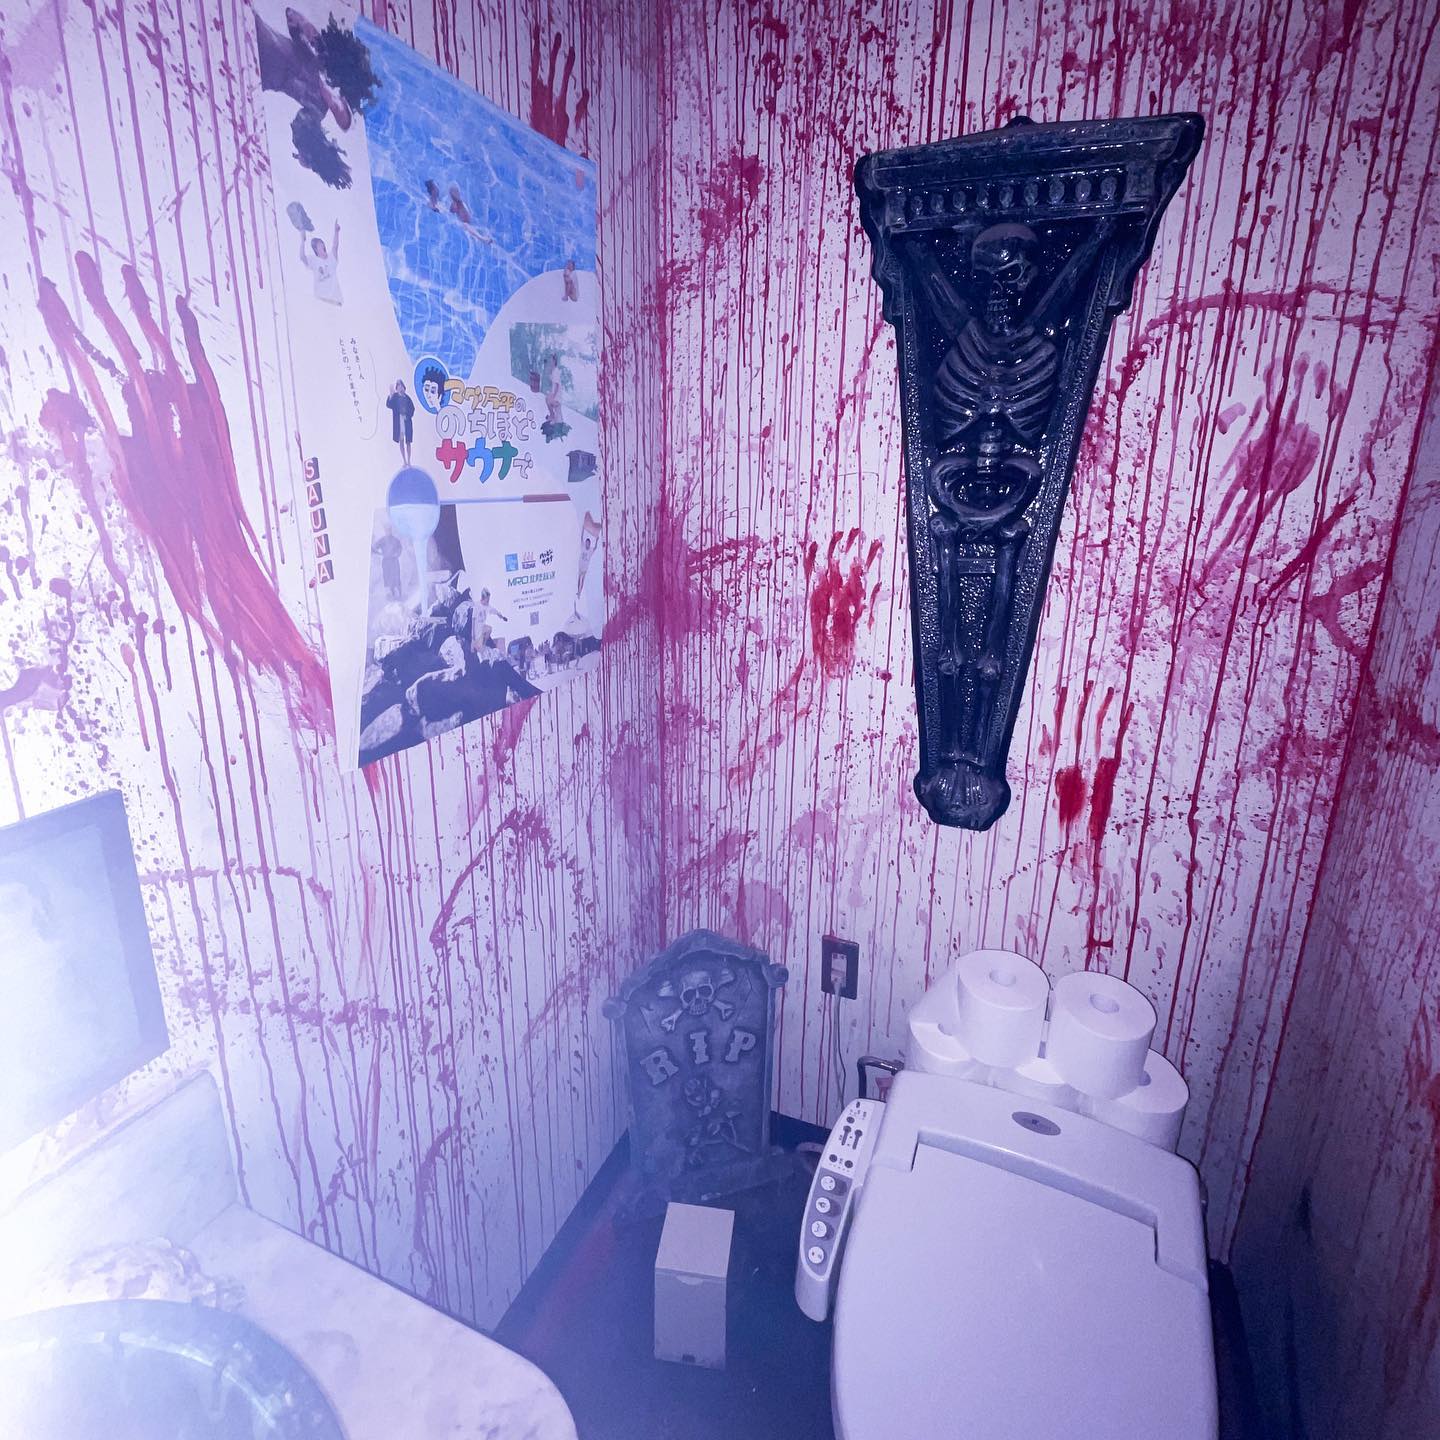 7 Bizzare Foodie Experience Vampire Cafe Toilet